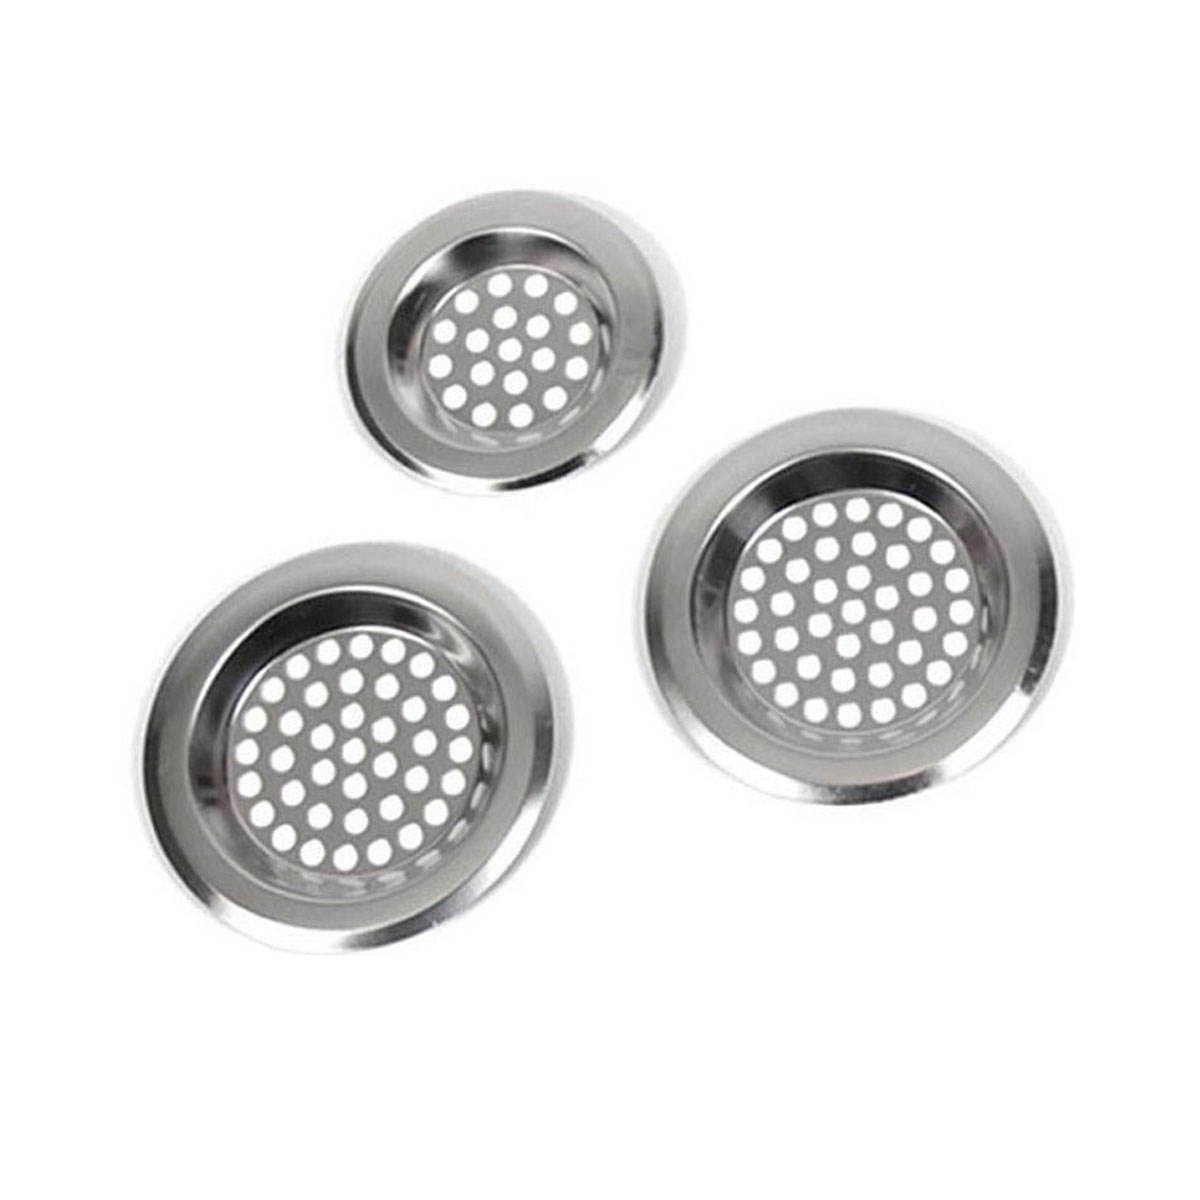 Sink Filters 3 Pieces